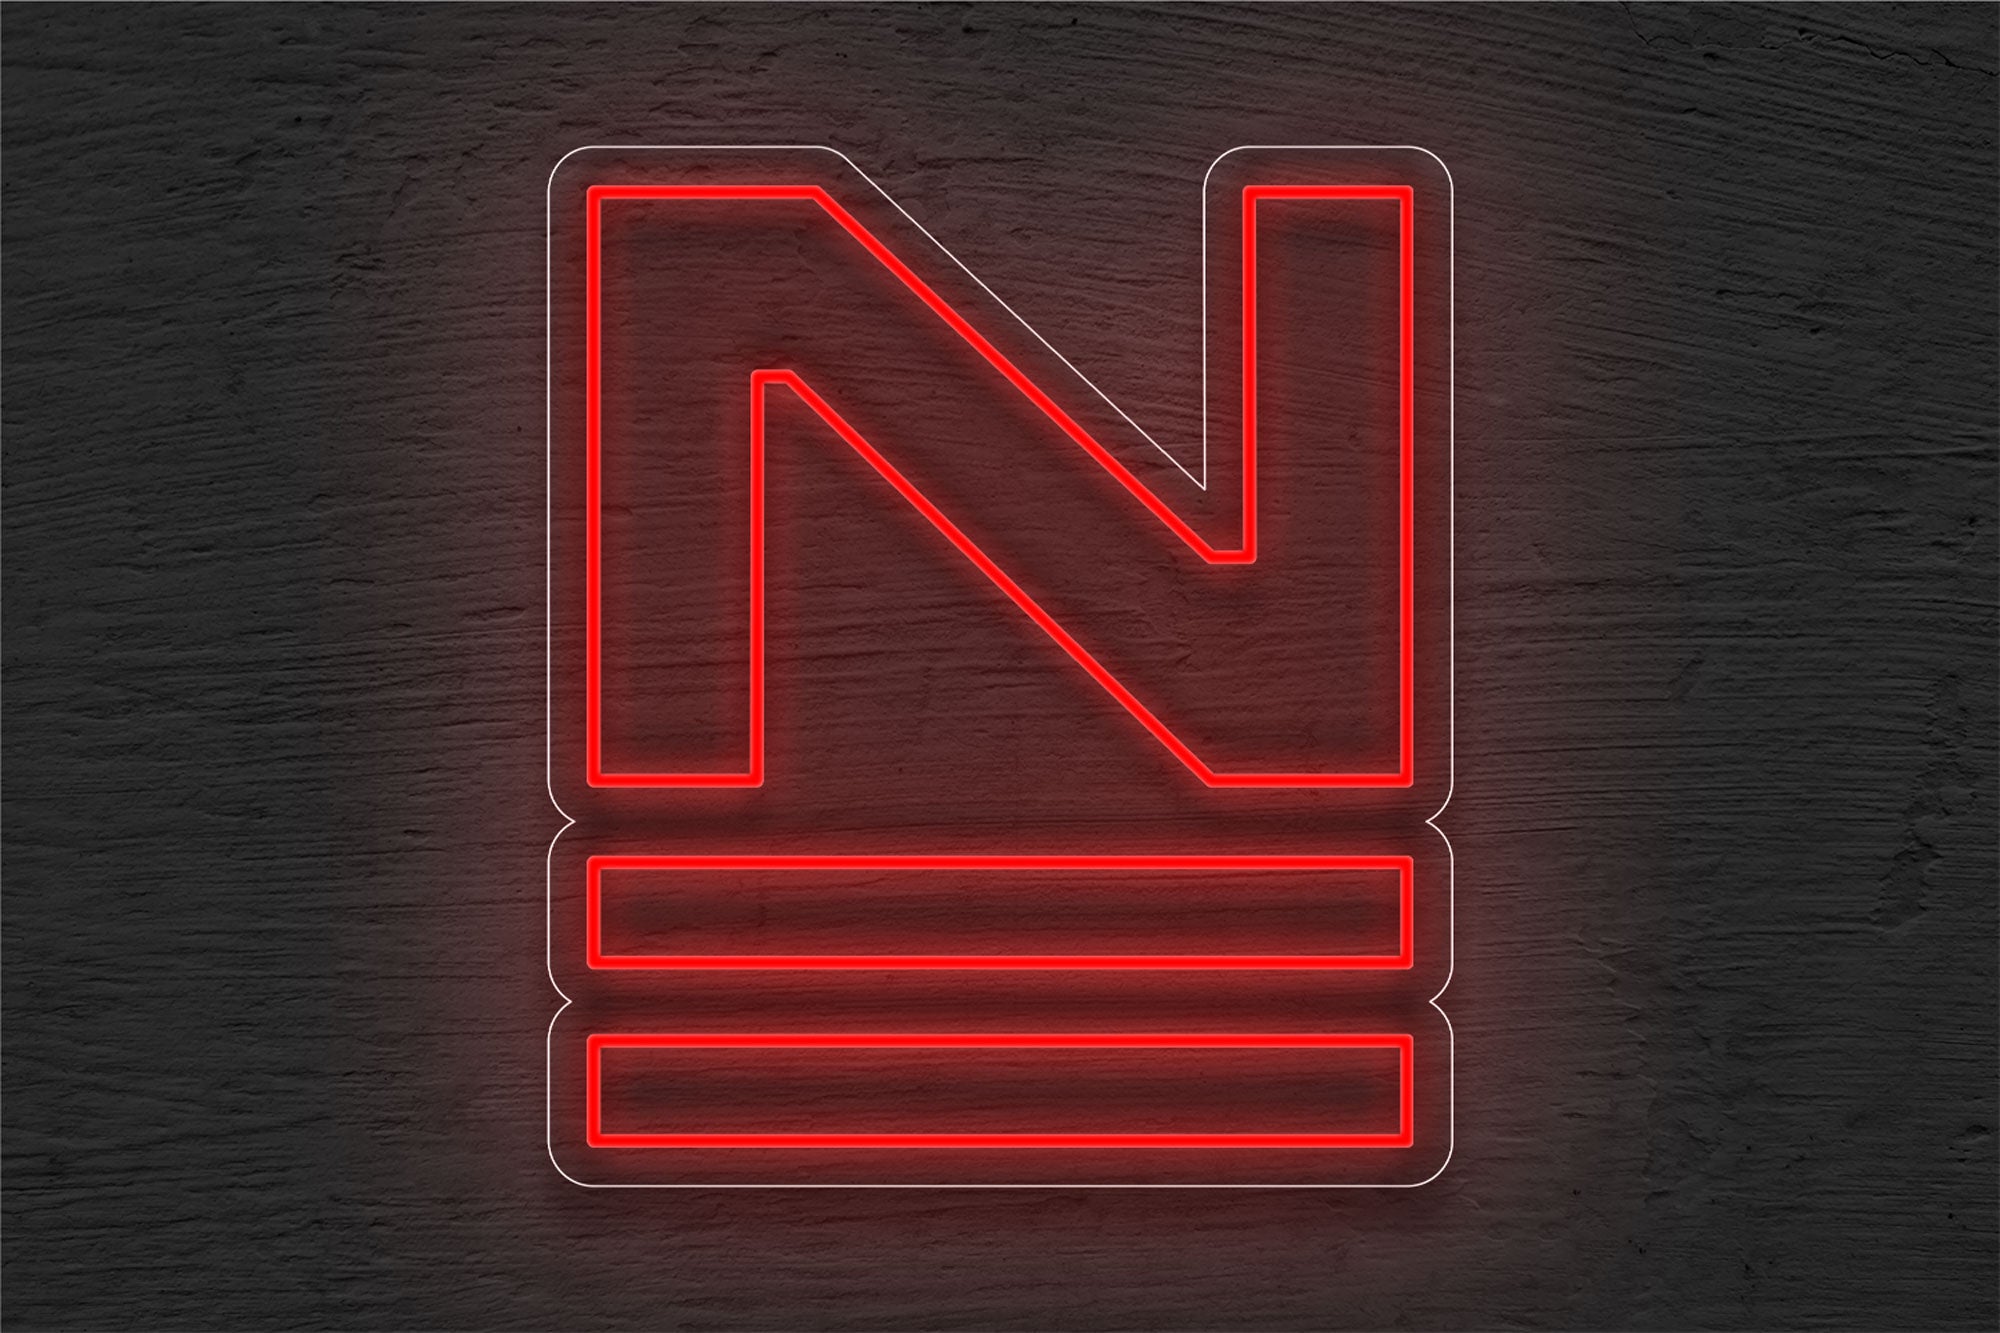 The New School LED Neon Sign